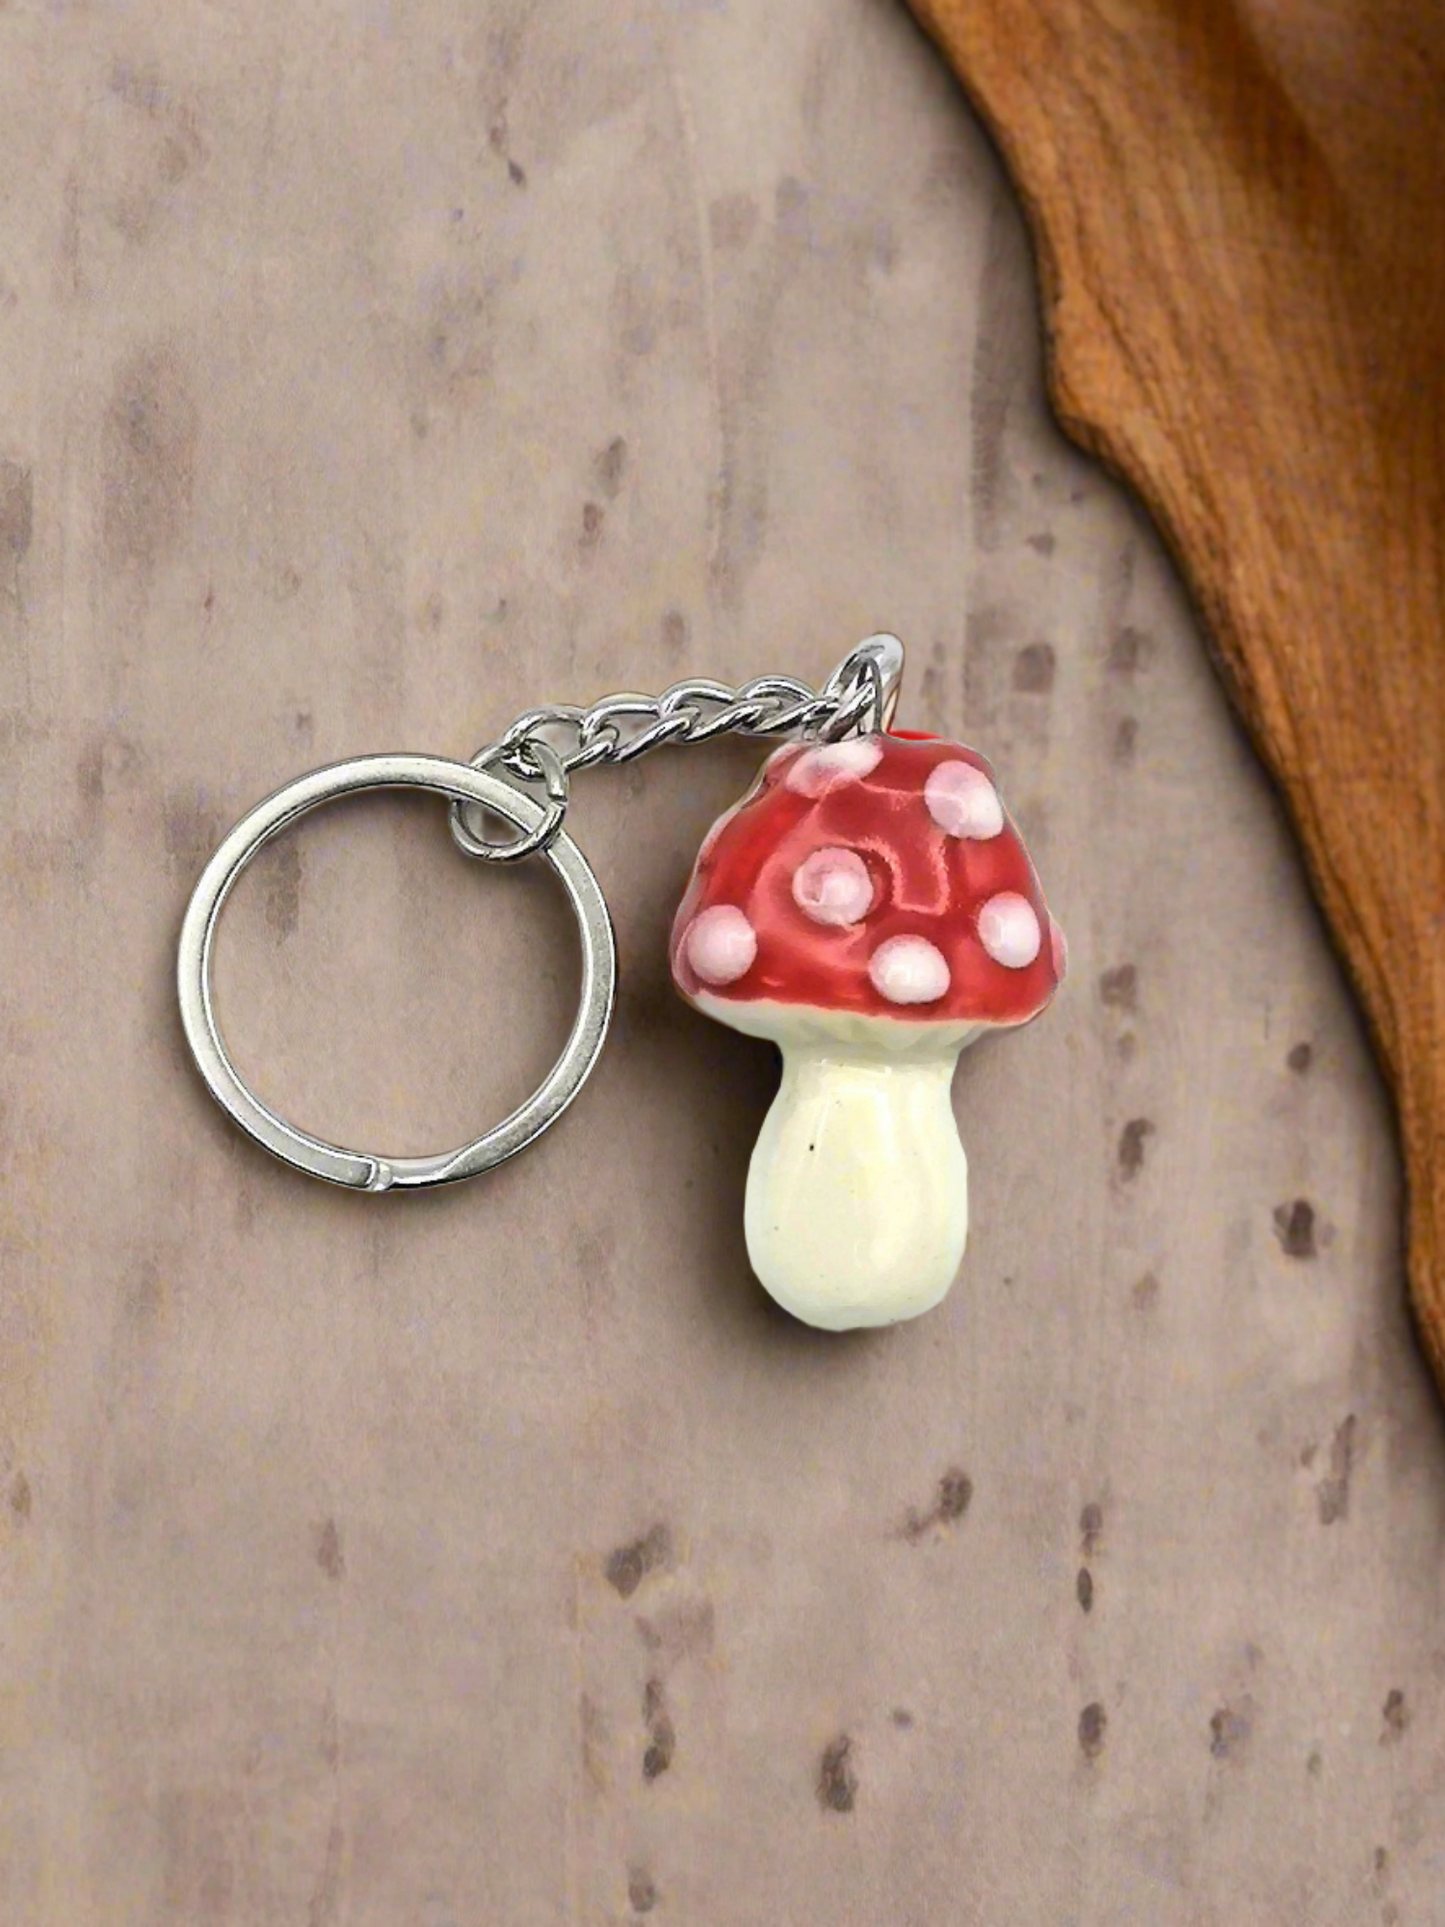 Handmade Ceramic Red Mushroom Keychain for Women – Unique Cottagecore Charm Gift – Artisan Mushroom Key Chain – Perfect Accessory and Gift for Her